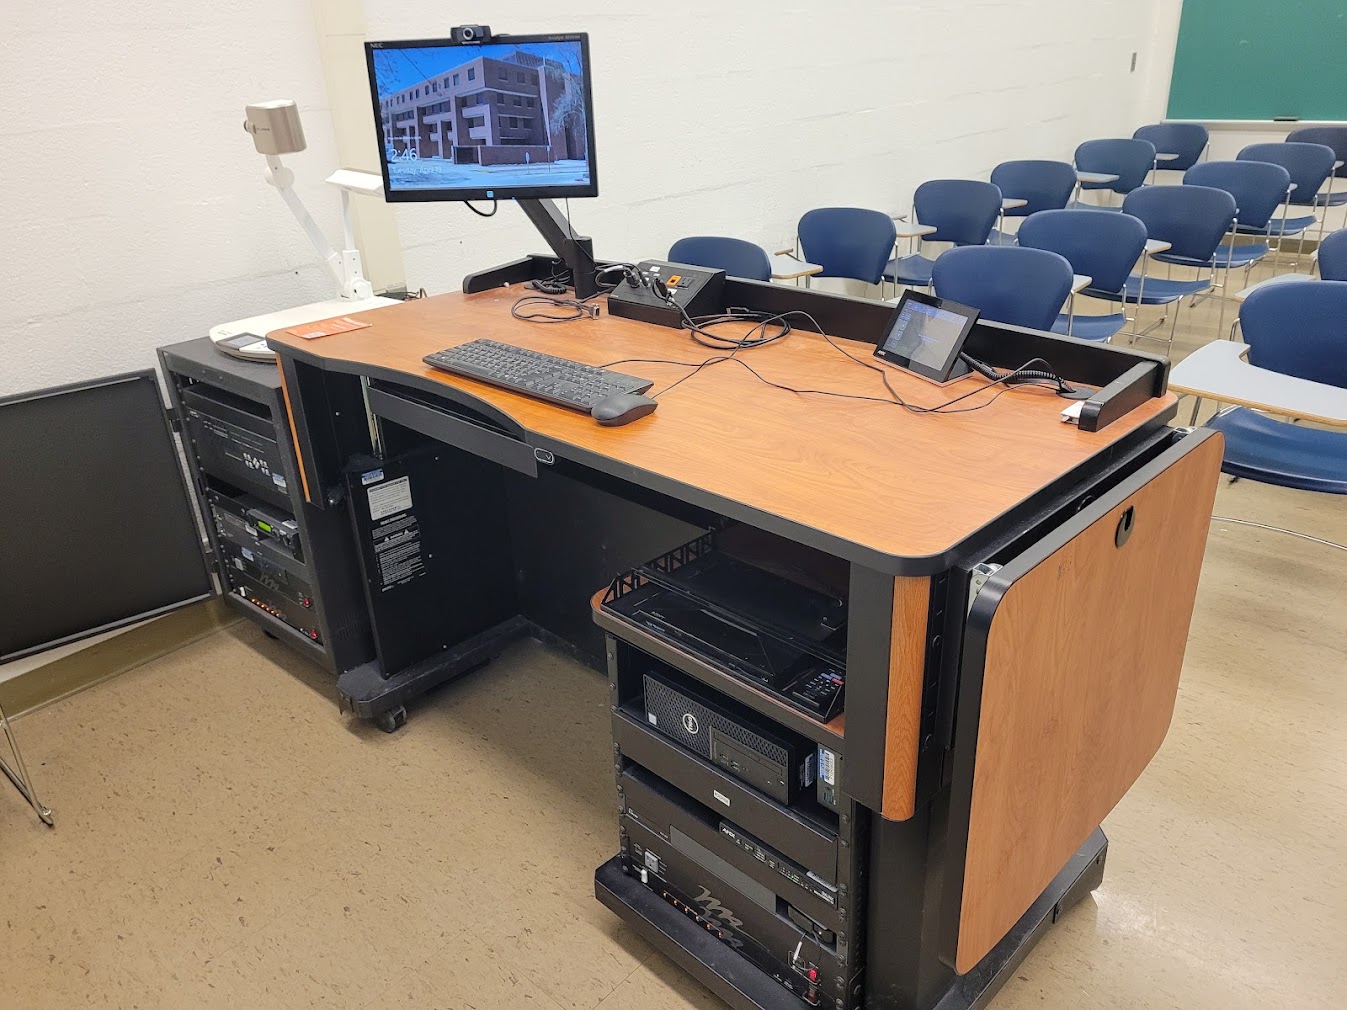 A view of the open cabinet with a computer monitor, VGA and HDMI inputs, a touch panel controller, document camera, and audiovisual rack.